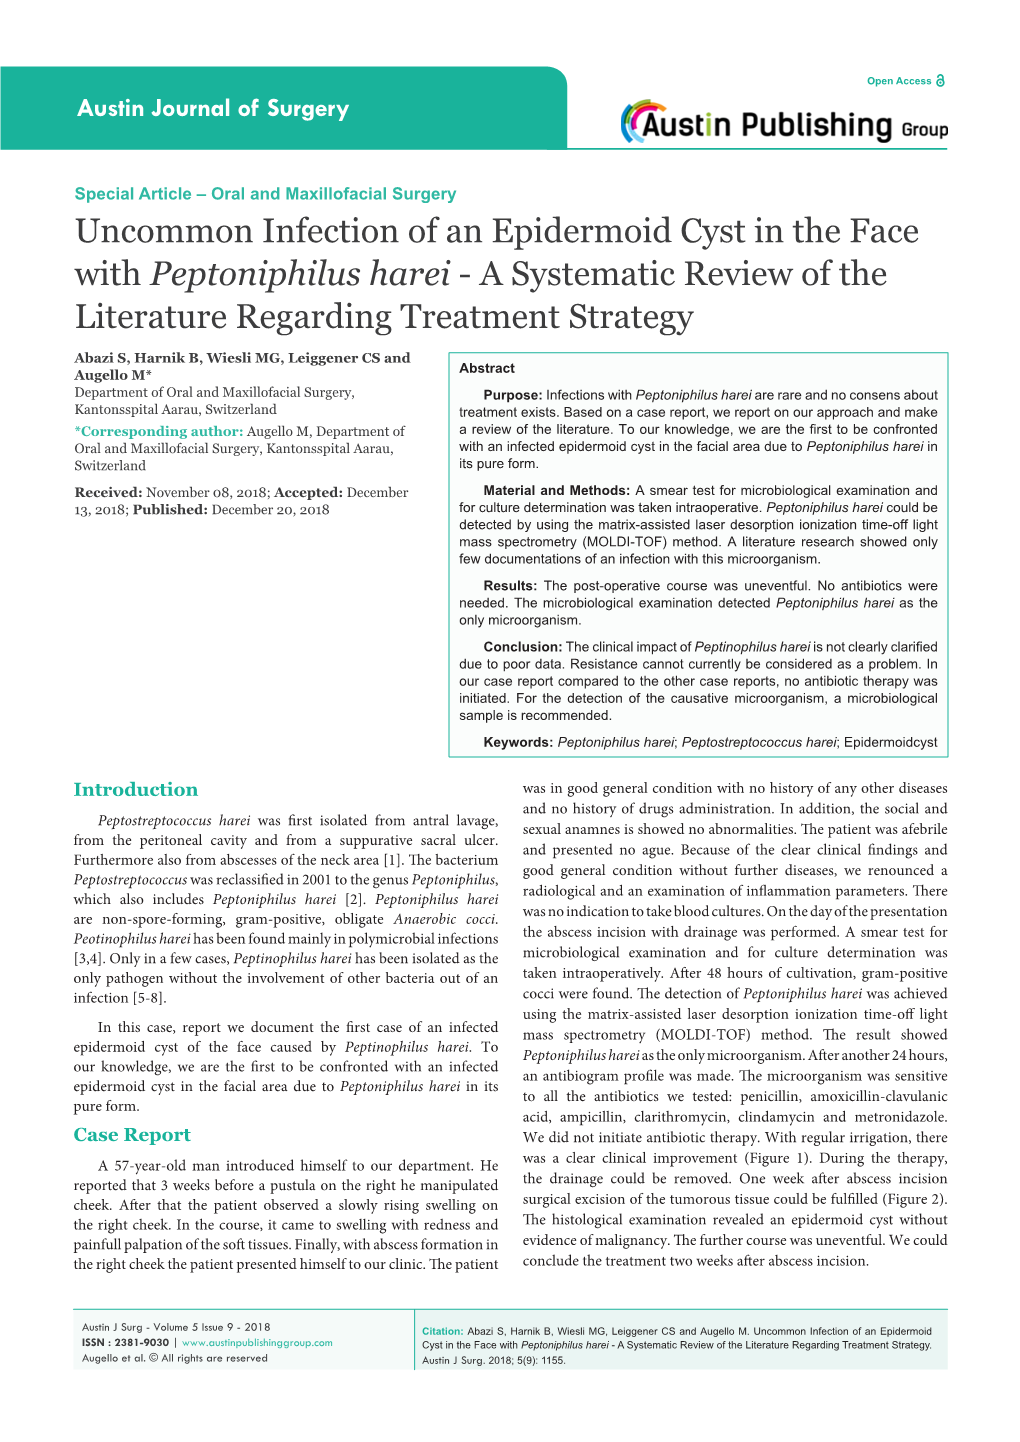 Peptoniphilus Harei - a Systematic Review of the Literature Regarding Treatment Strategy